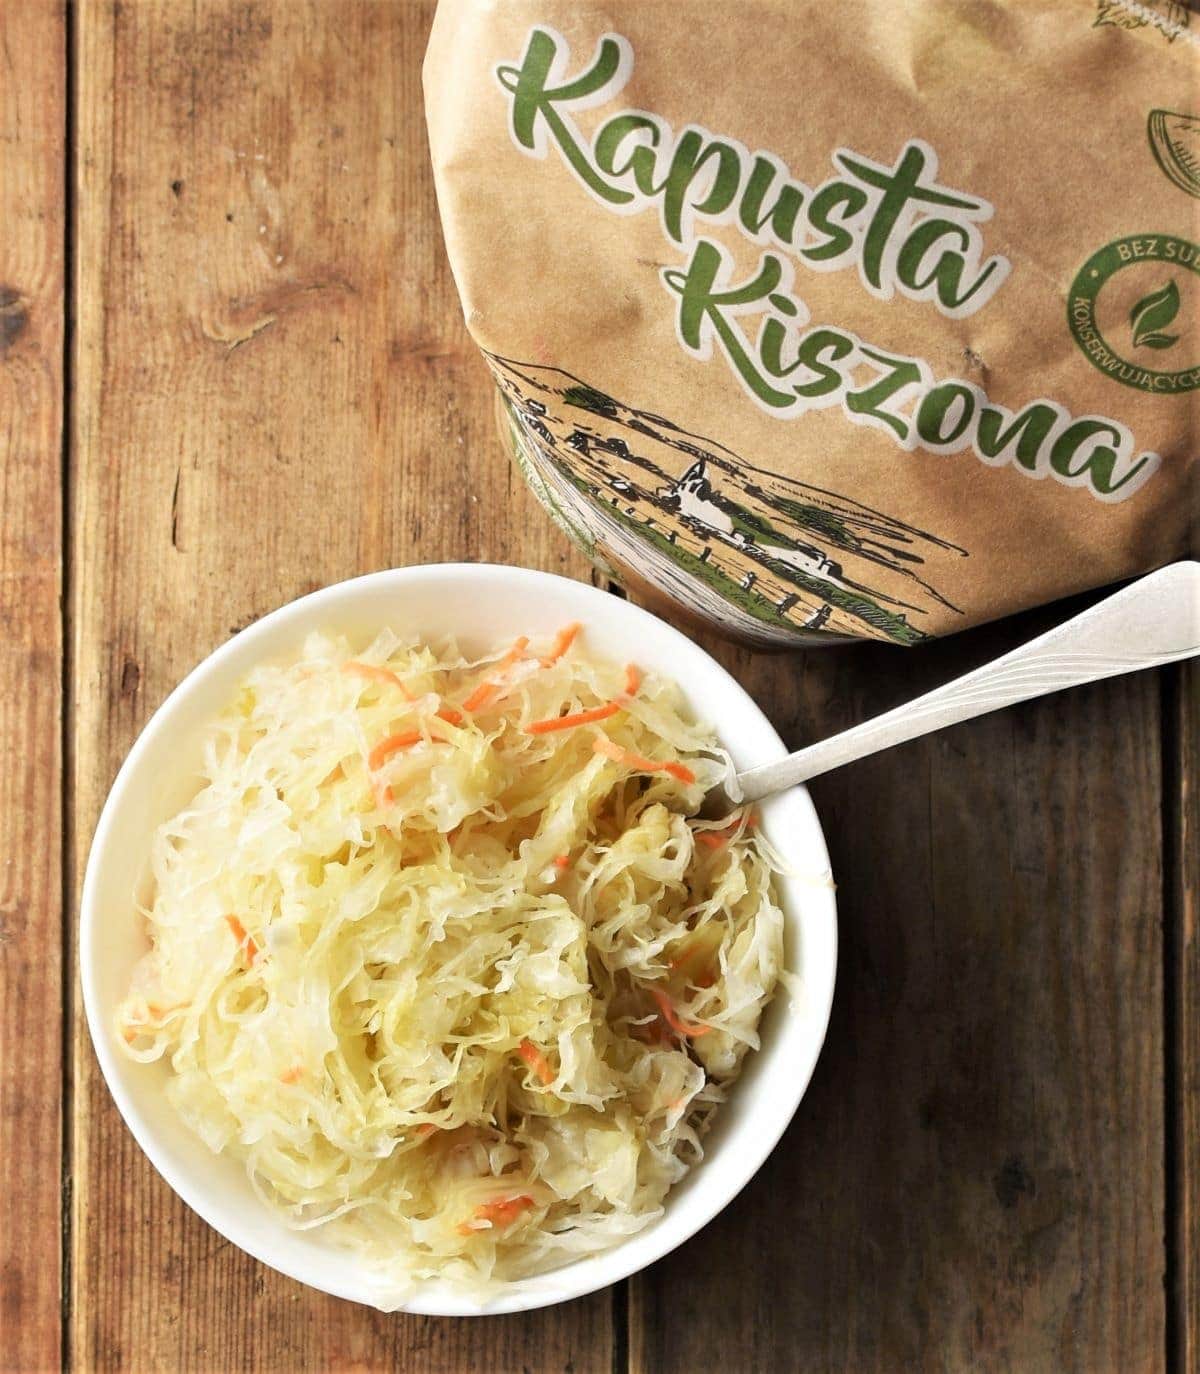 Top down view of sauerkraut in white bowl with spoon and sauerkraut packaging.